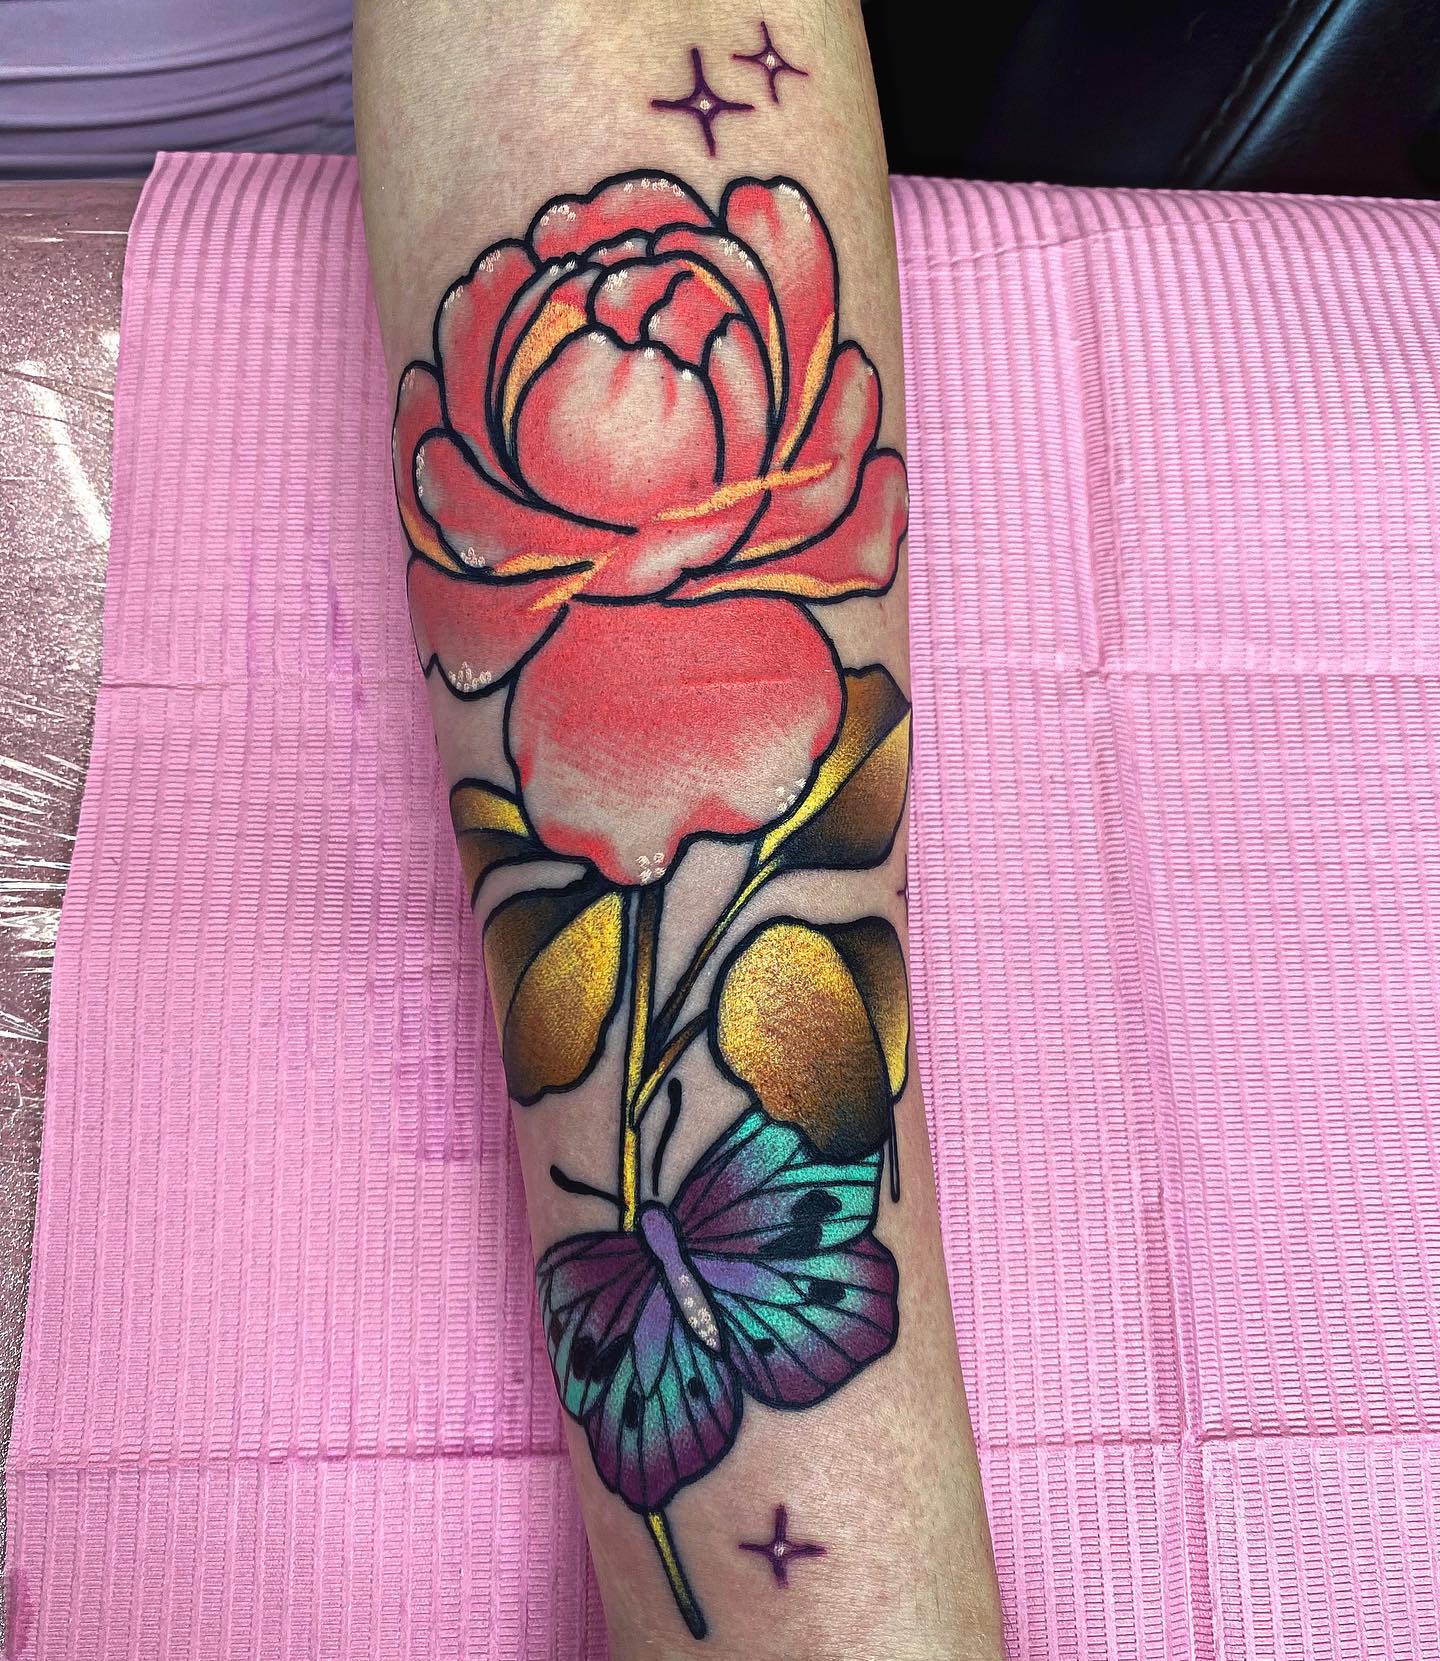 30+ Rose Tattoo Ideas That Will Make Your Heart Sing - 100 Tattoos